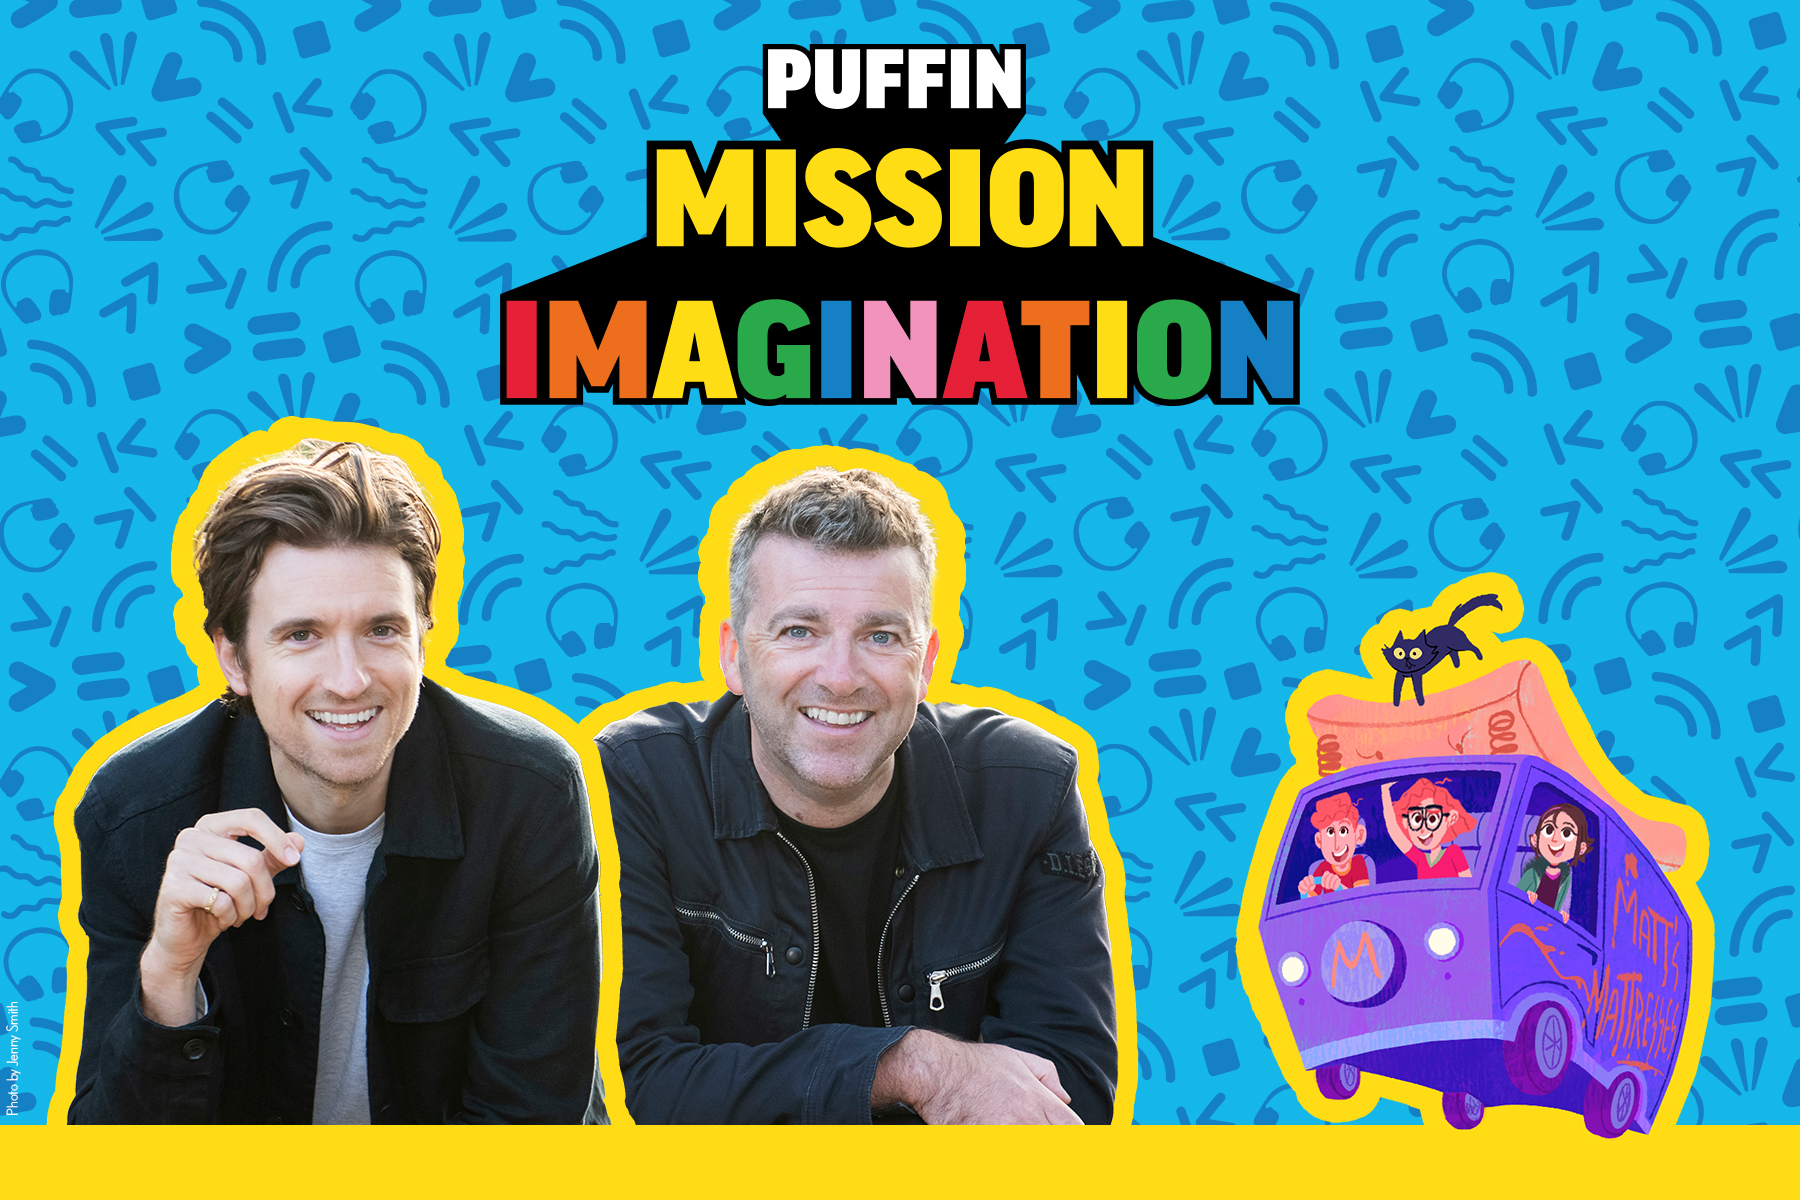 A blue image with the words 'Puffin Mission Imagination' in the centre in a bold multicoloured graphic text above an author photo of Greg James and Chris Smith